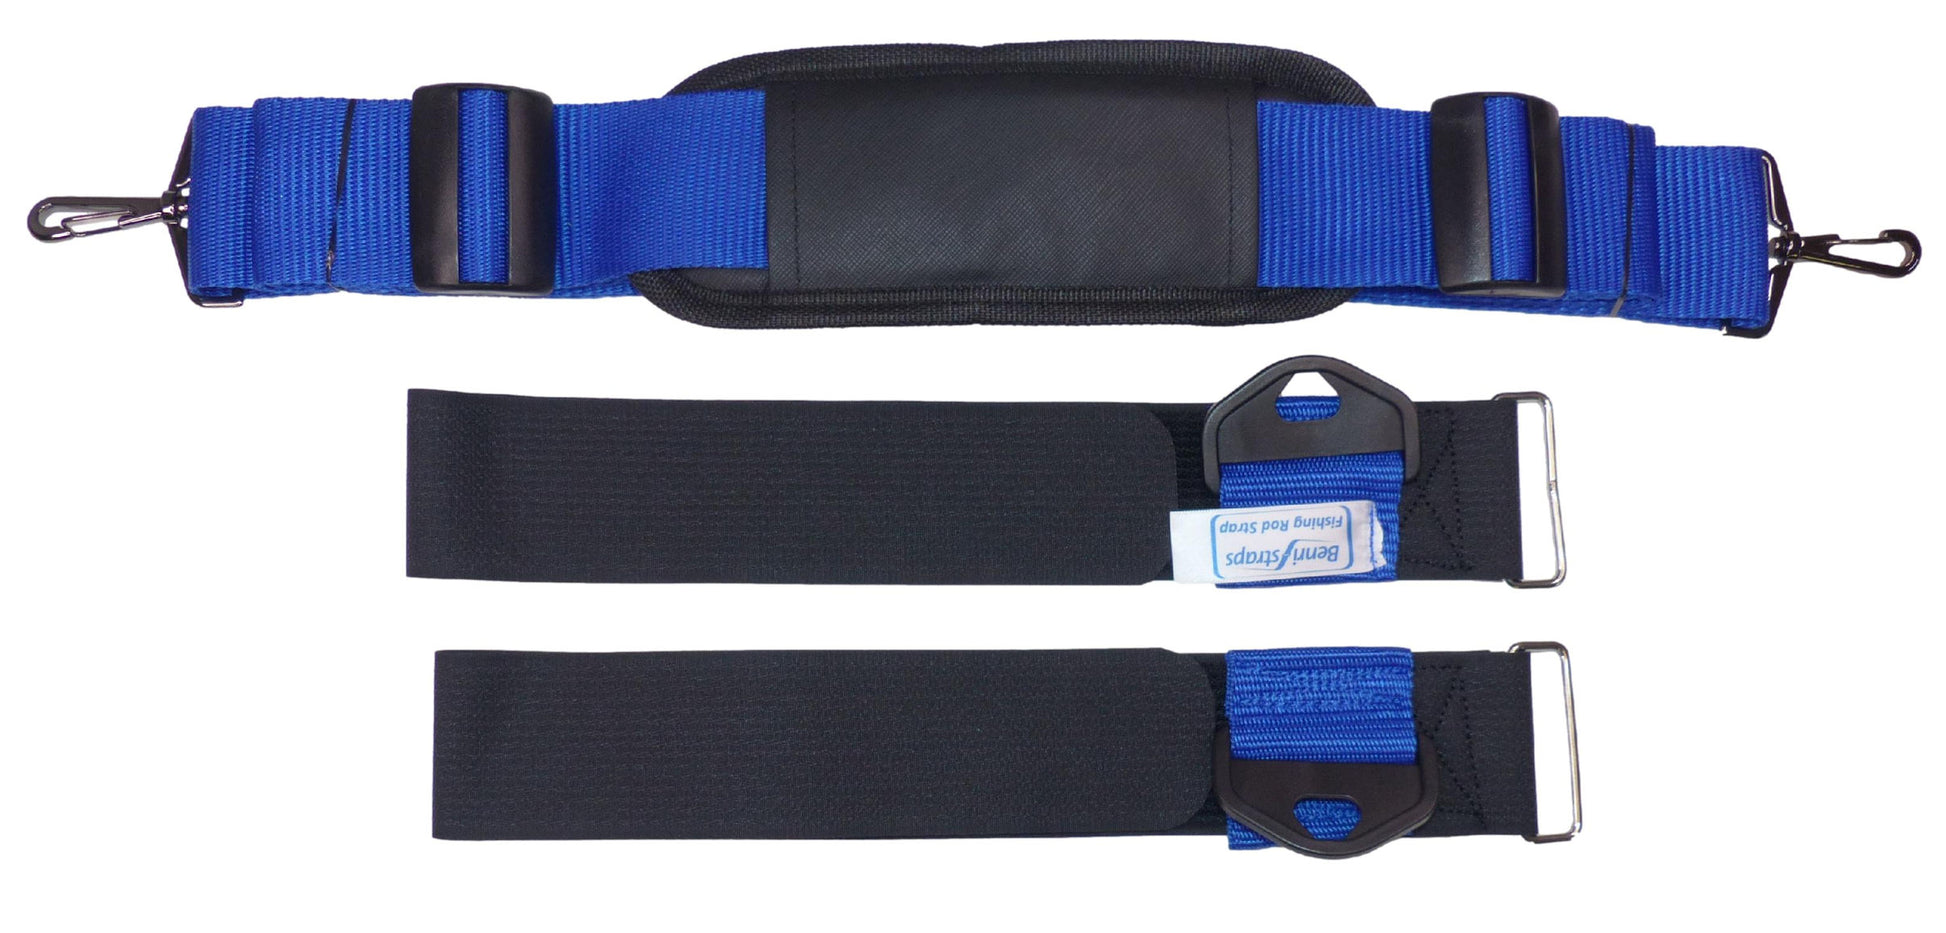 Benristraps Fishing Rod Carry Strap in blue